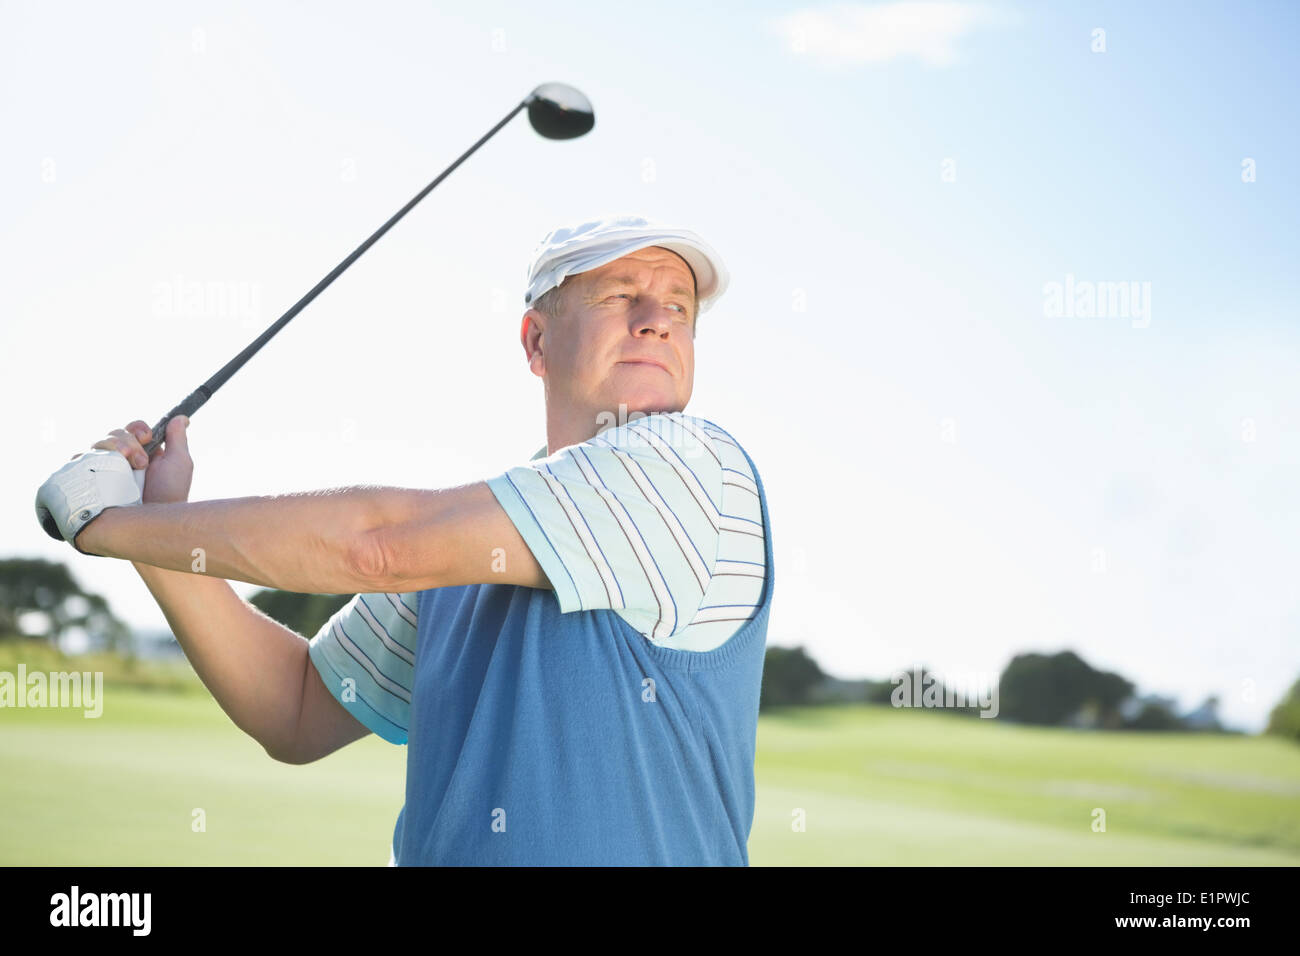 Concentrating golfer taking a shot Stock Photo